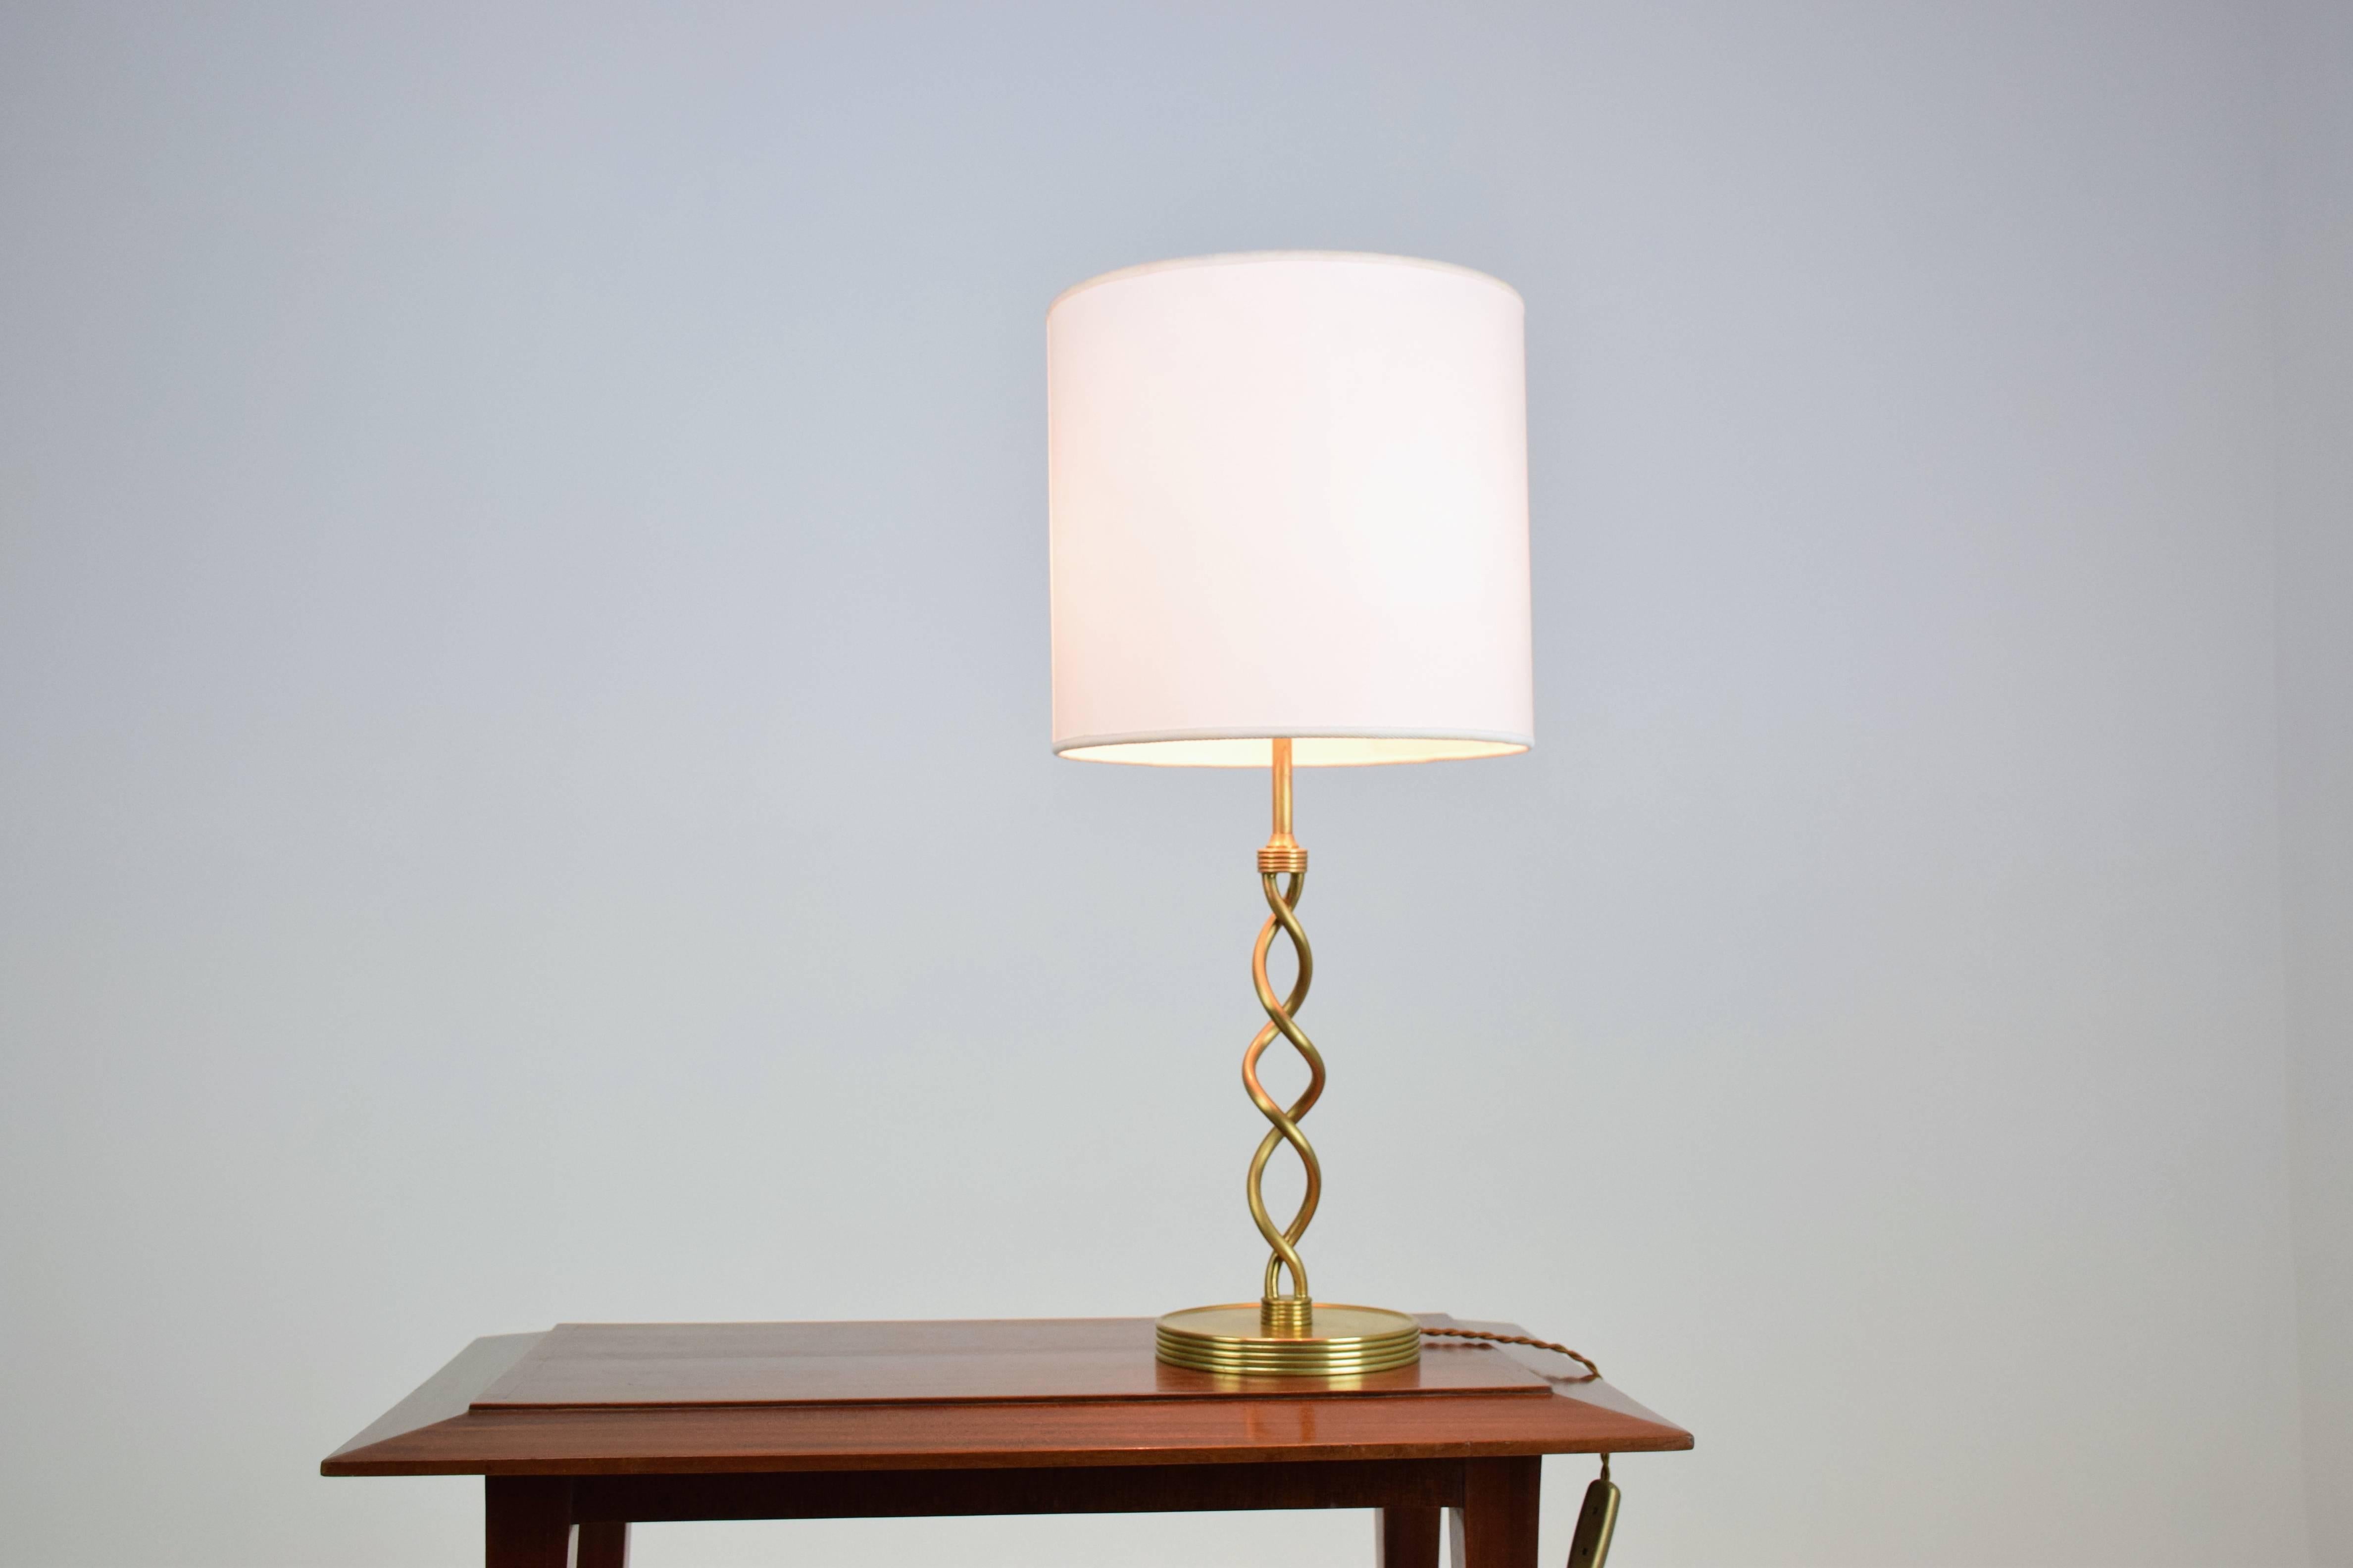 20th century sophisticated French table lamp with twisted solid brass detail, circa 1960s. Restored through polishing rewiring and quality new shade.
      